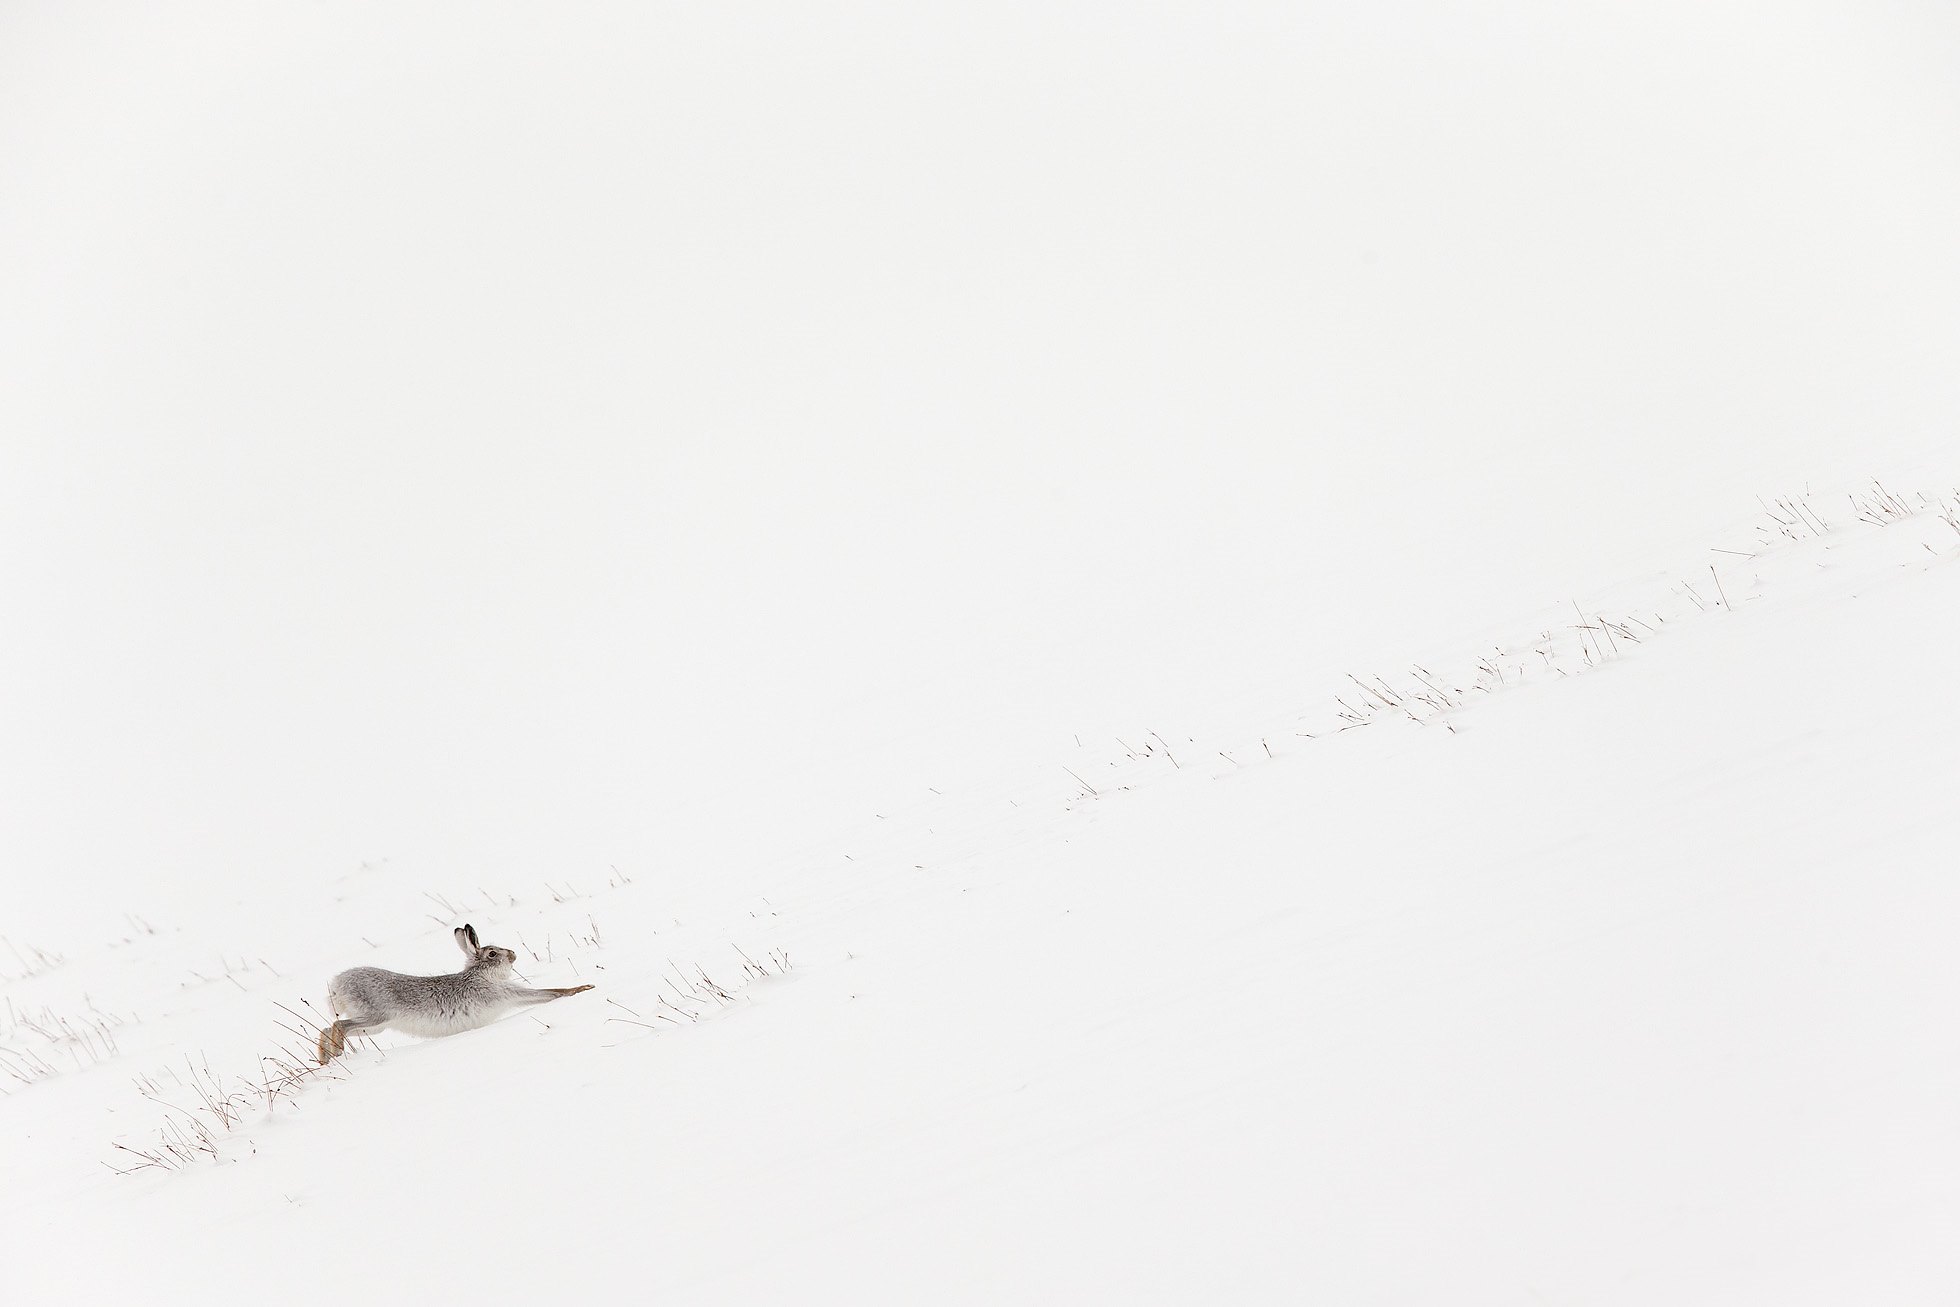 Mountain Hare (Lepus timidus) in white winter coat stretching - in snowy habitat